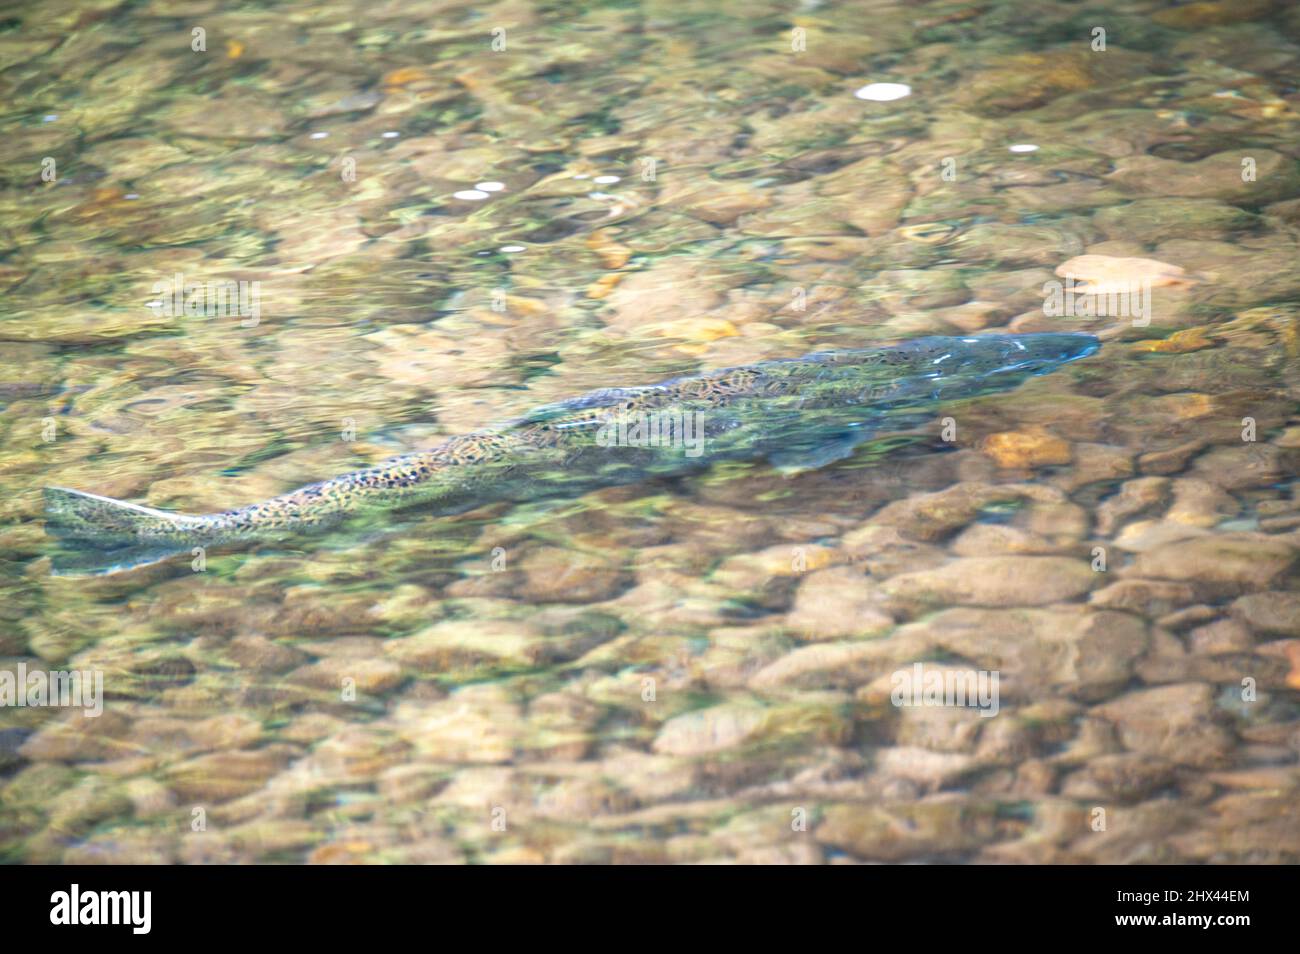 Pacific salmon spawing in the Green River of Washington state Stock Photo